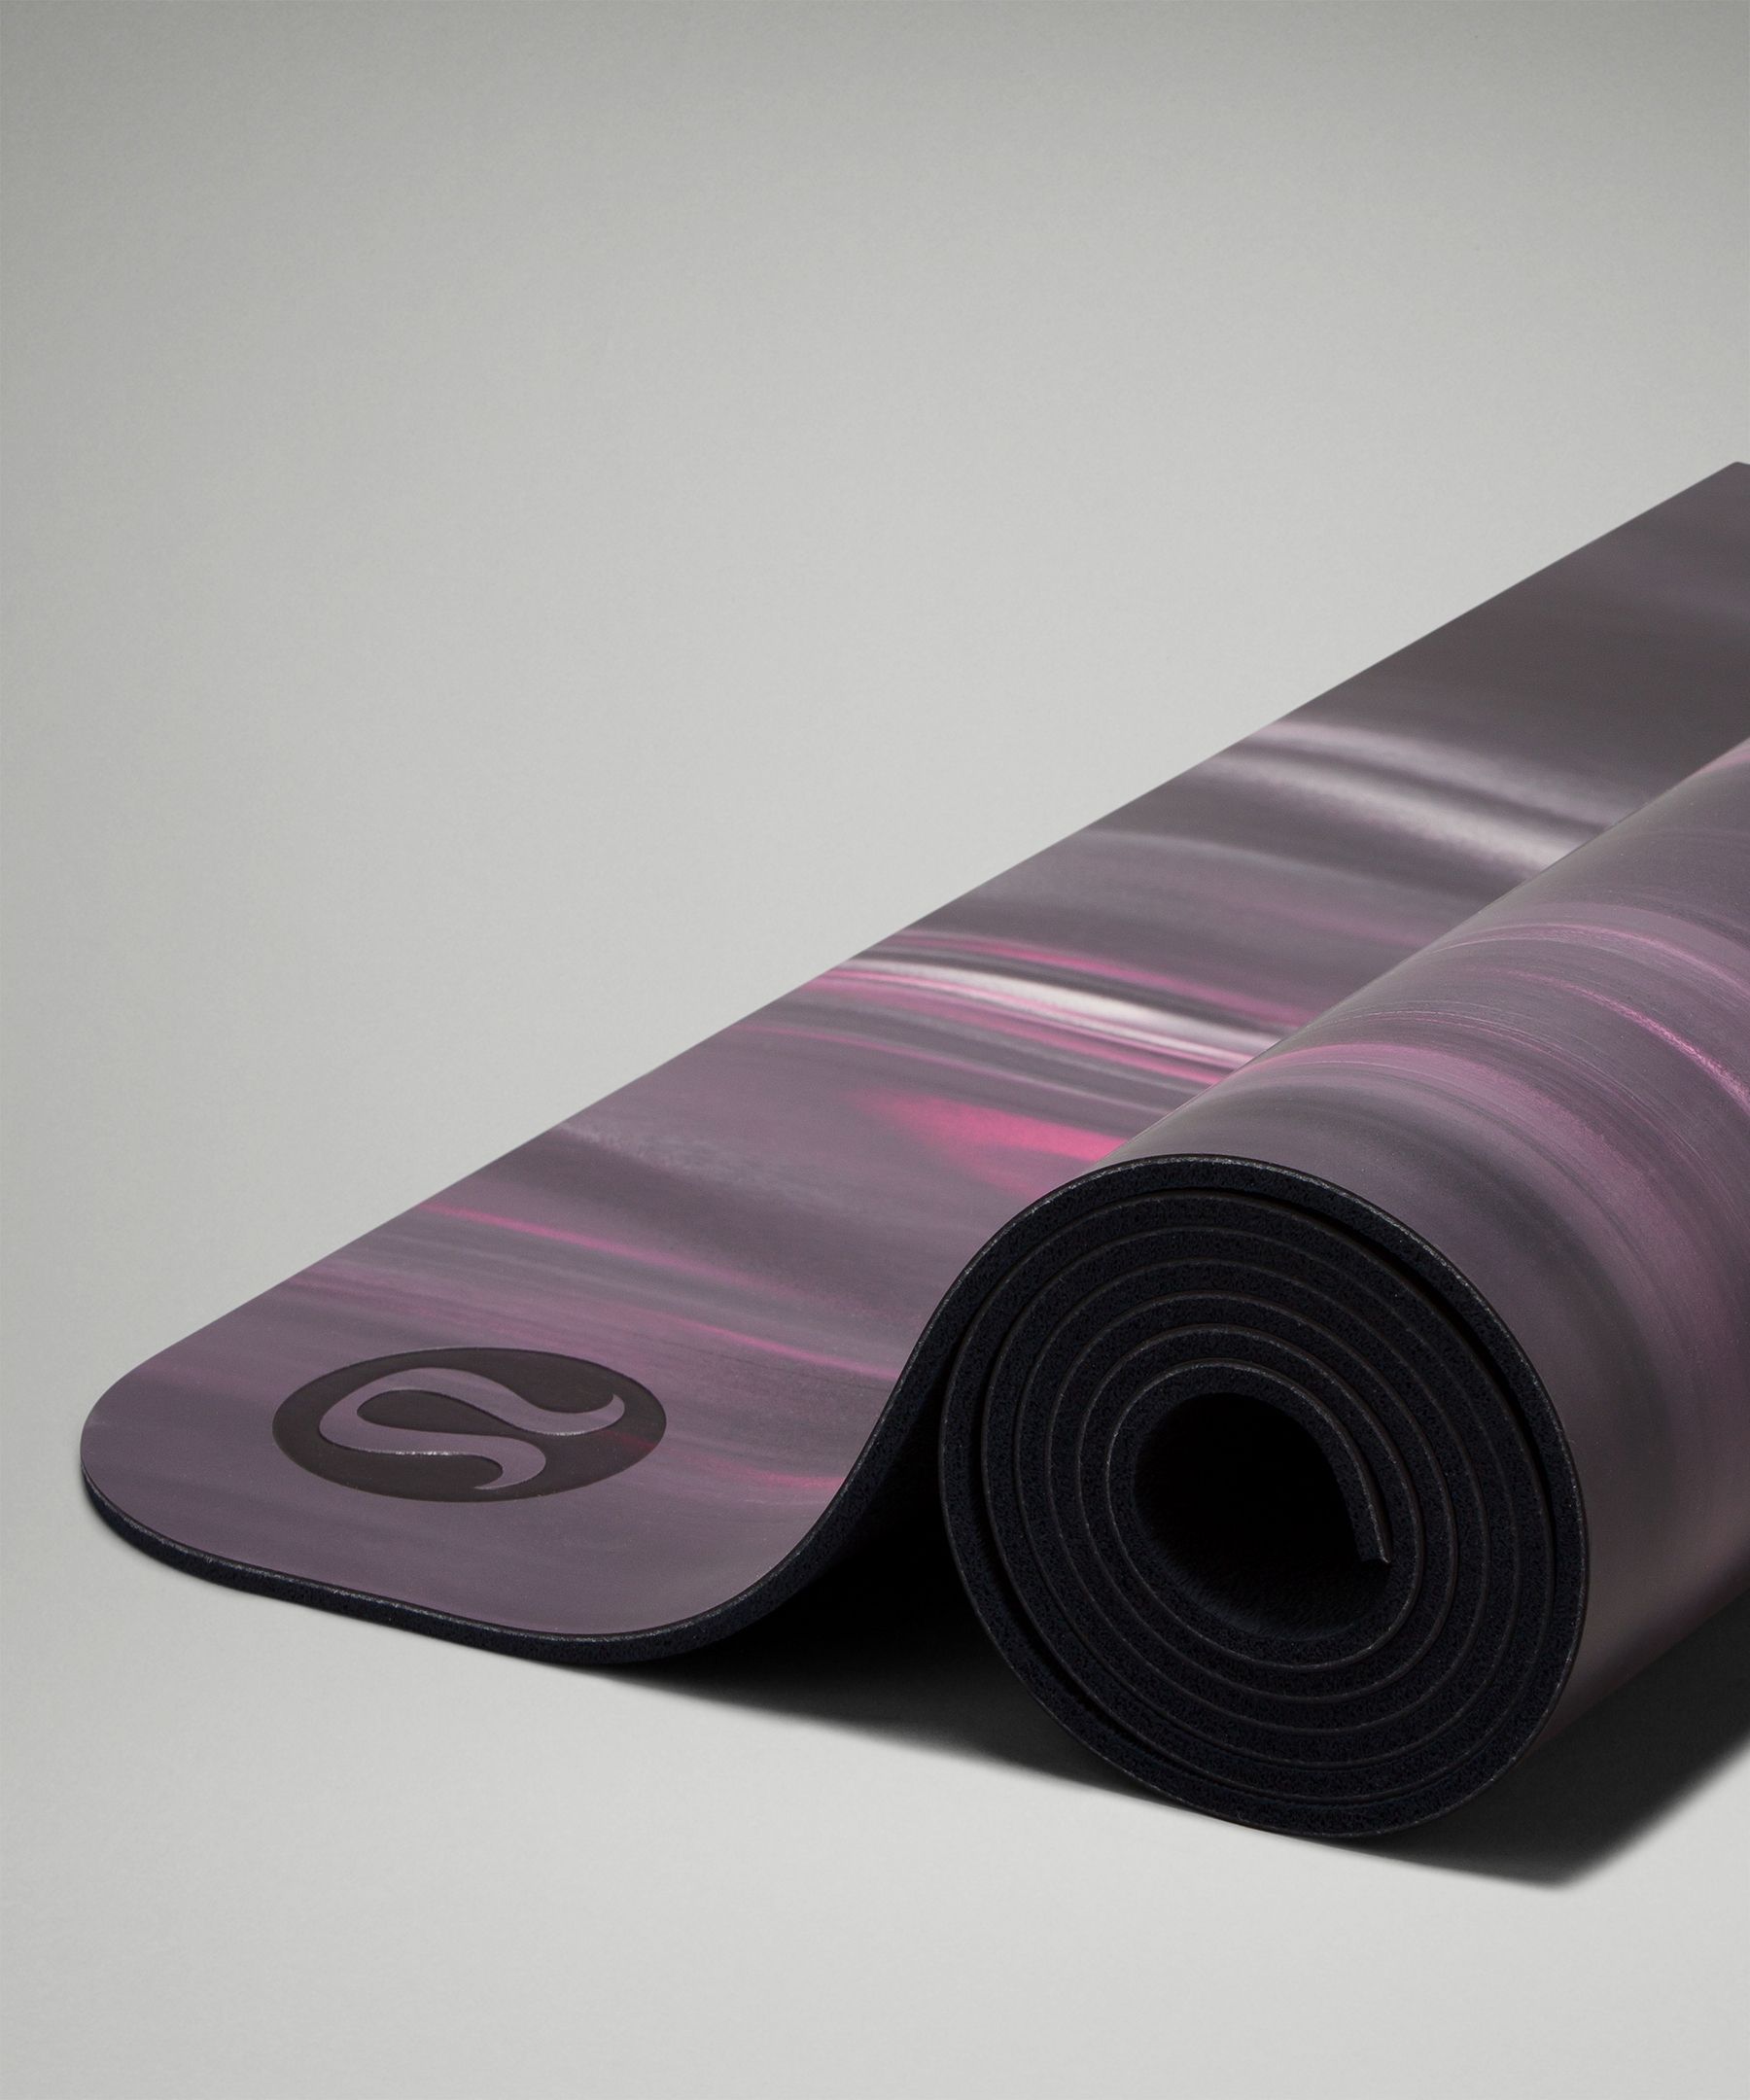 How to Clean a Lululemon Yoga Mat…(and Why)